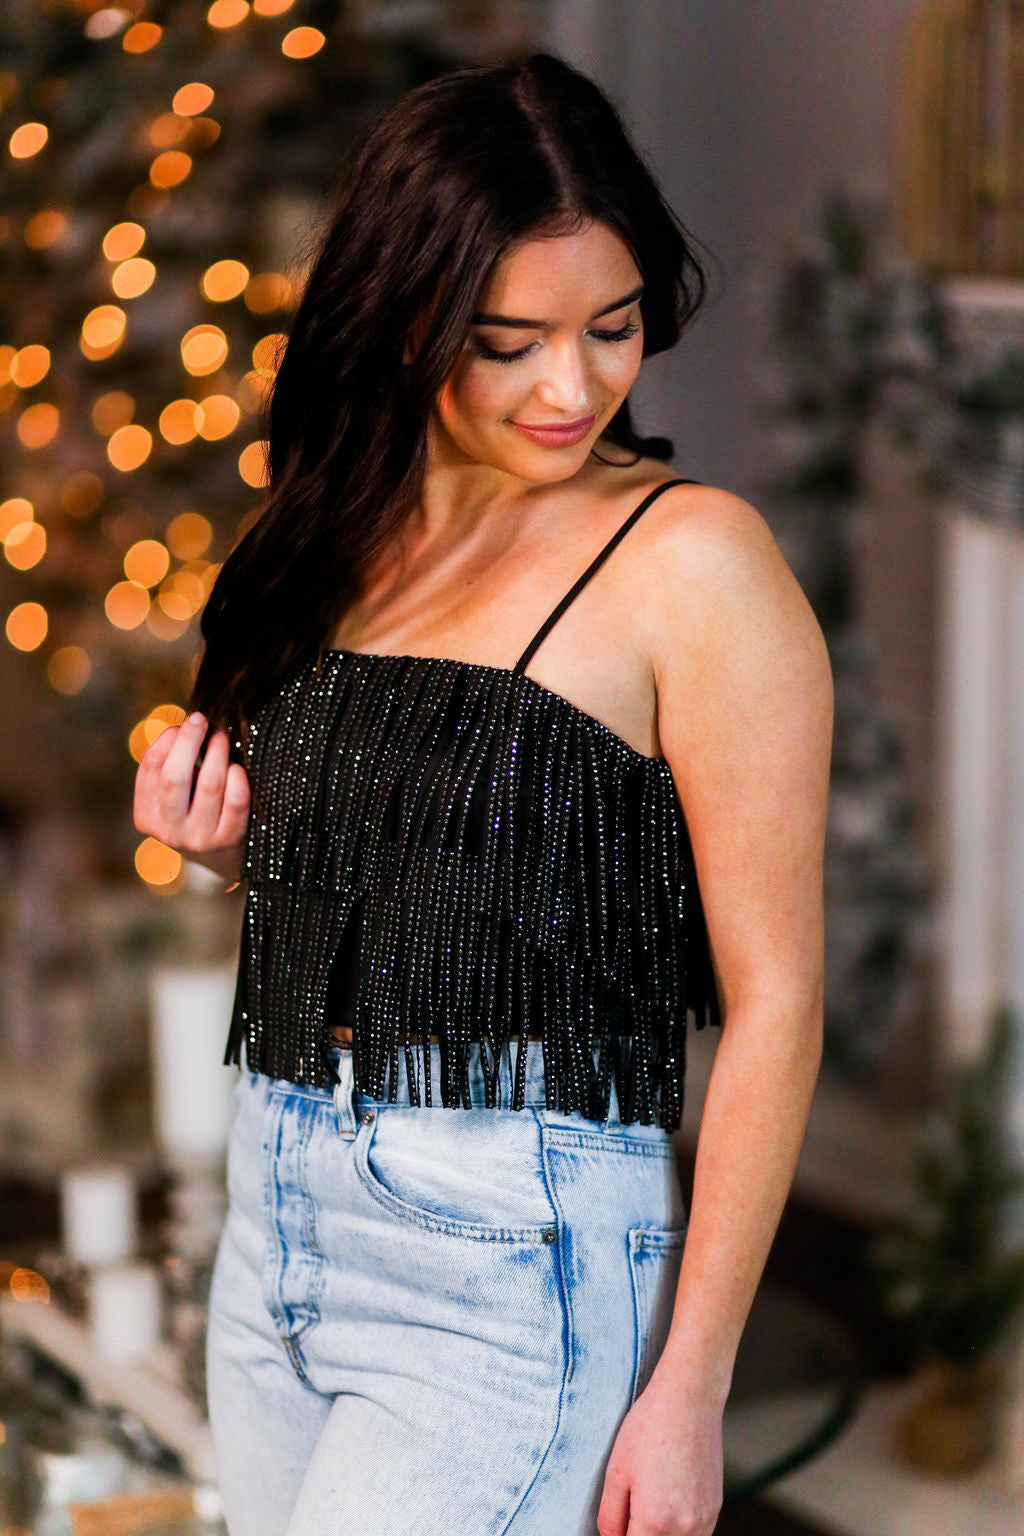 Black Metallic Fringe Crop Top - Shop Cute New Years Tops At Kendry Collection Boutique